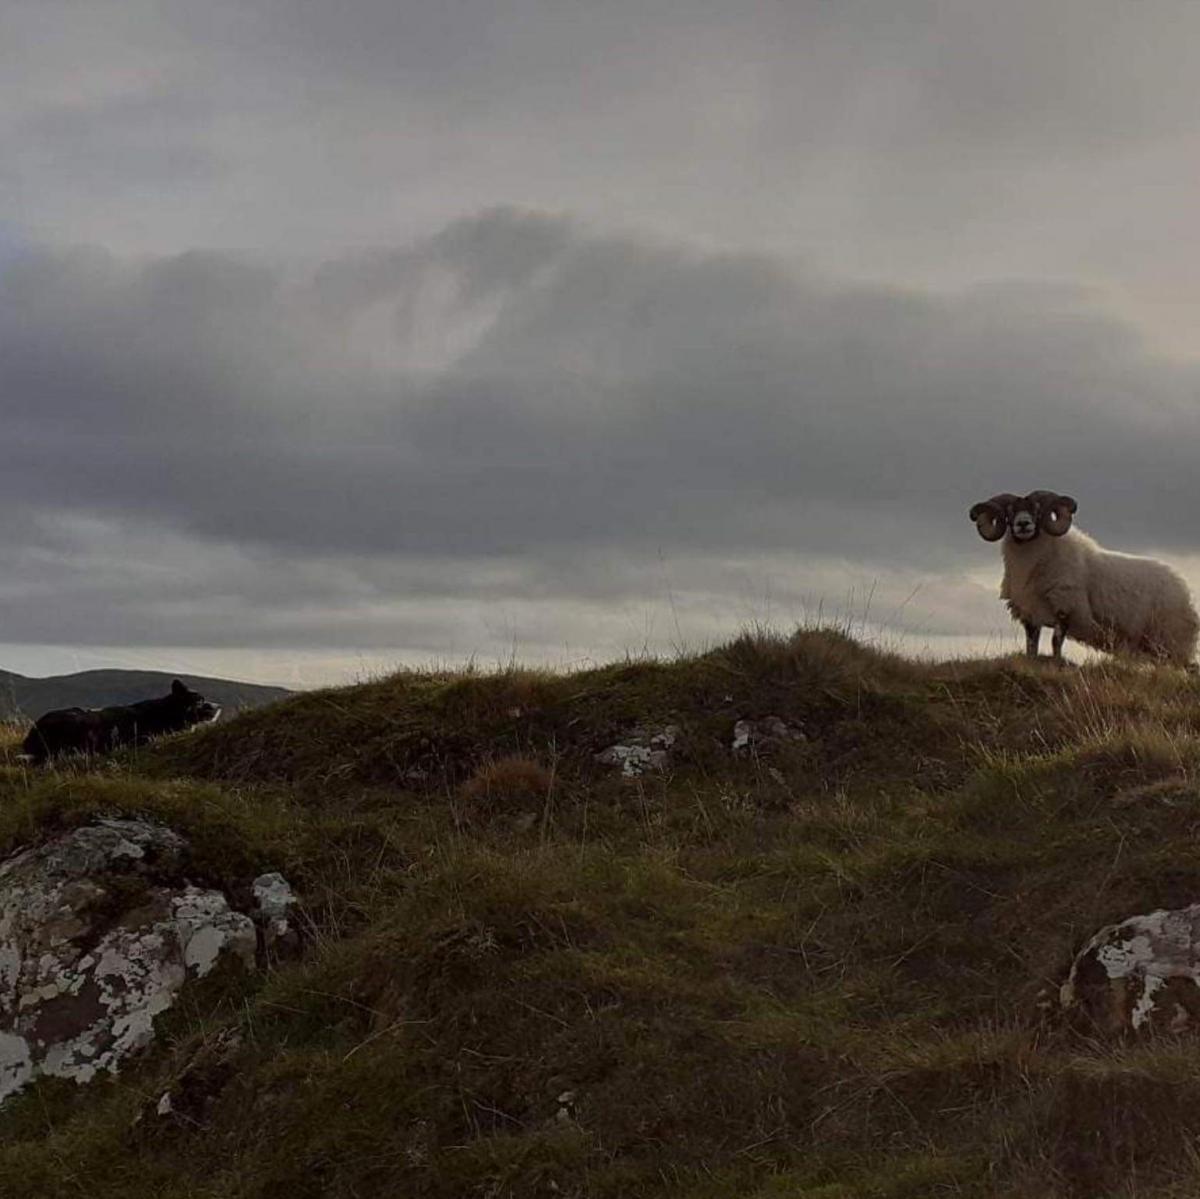 Iain Shaw - A picture of myself and my dog Whisp checking tups on Turnalt Farm in Argyll on a rare sunny day.